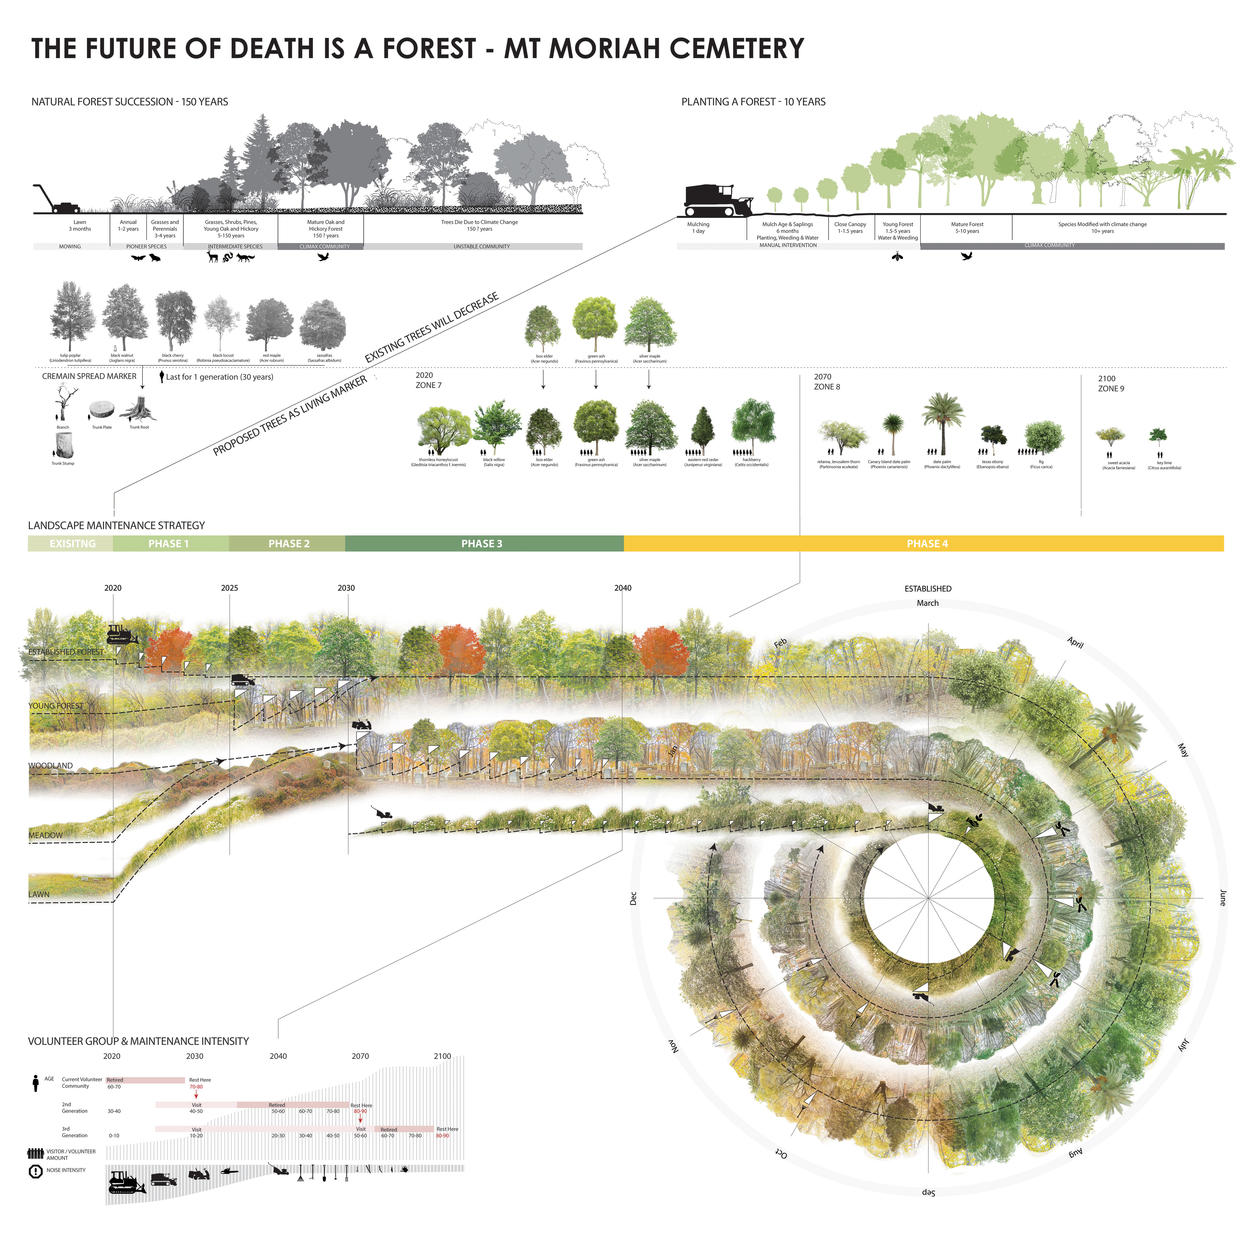 Phased strategy to turn abandoned landscape into a forest cemetery through planting and maintenance ritual